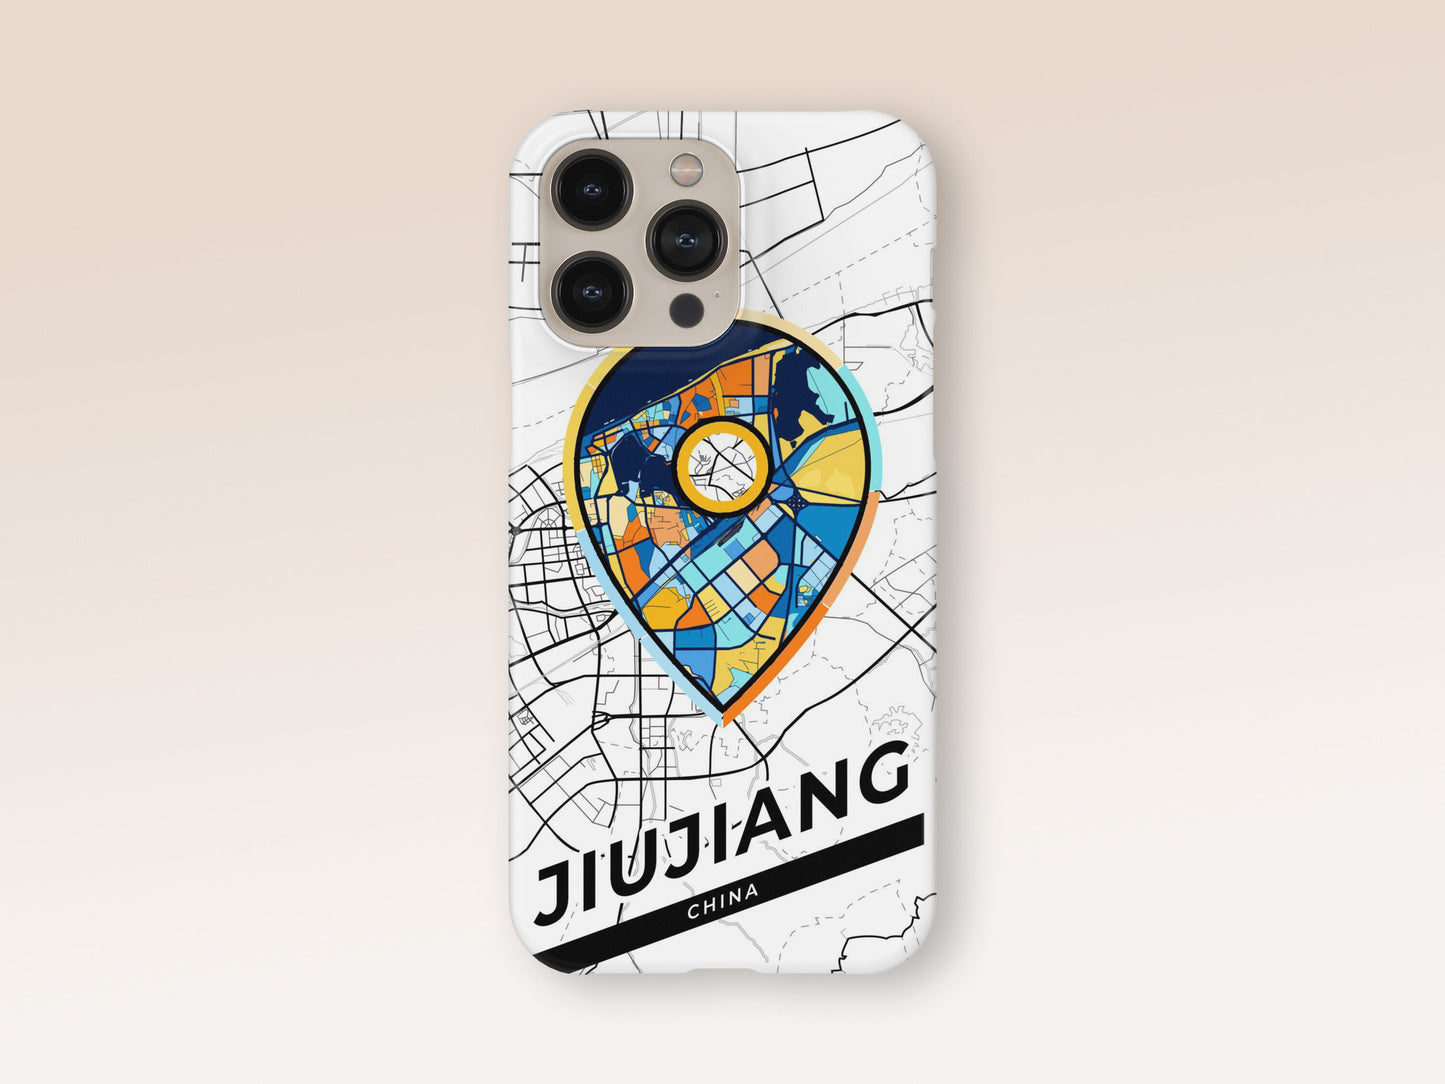 Jiujiang China slim phone case with colorful icon. Birthday, wedding or housewarming gift. Couple match cases. 1